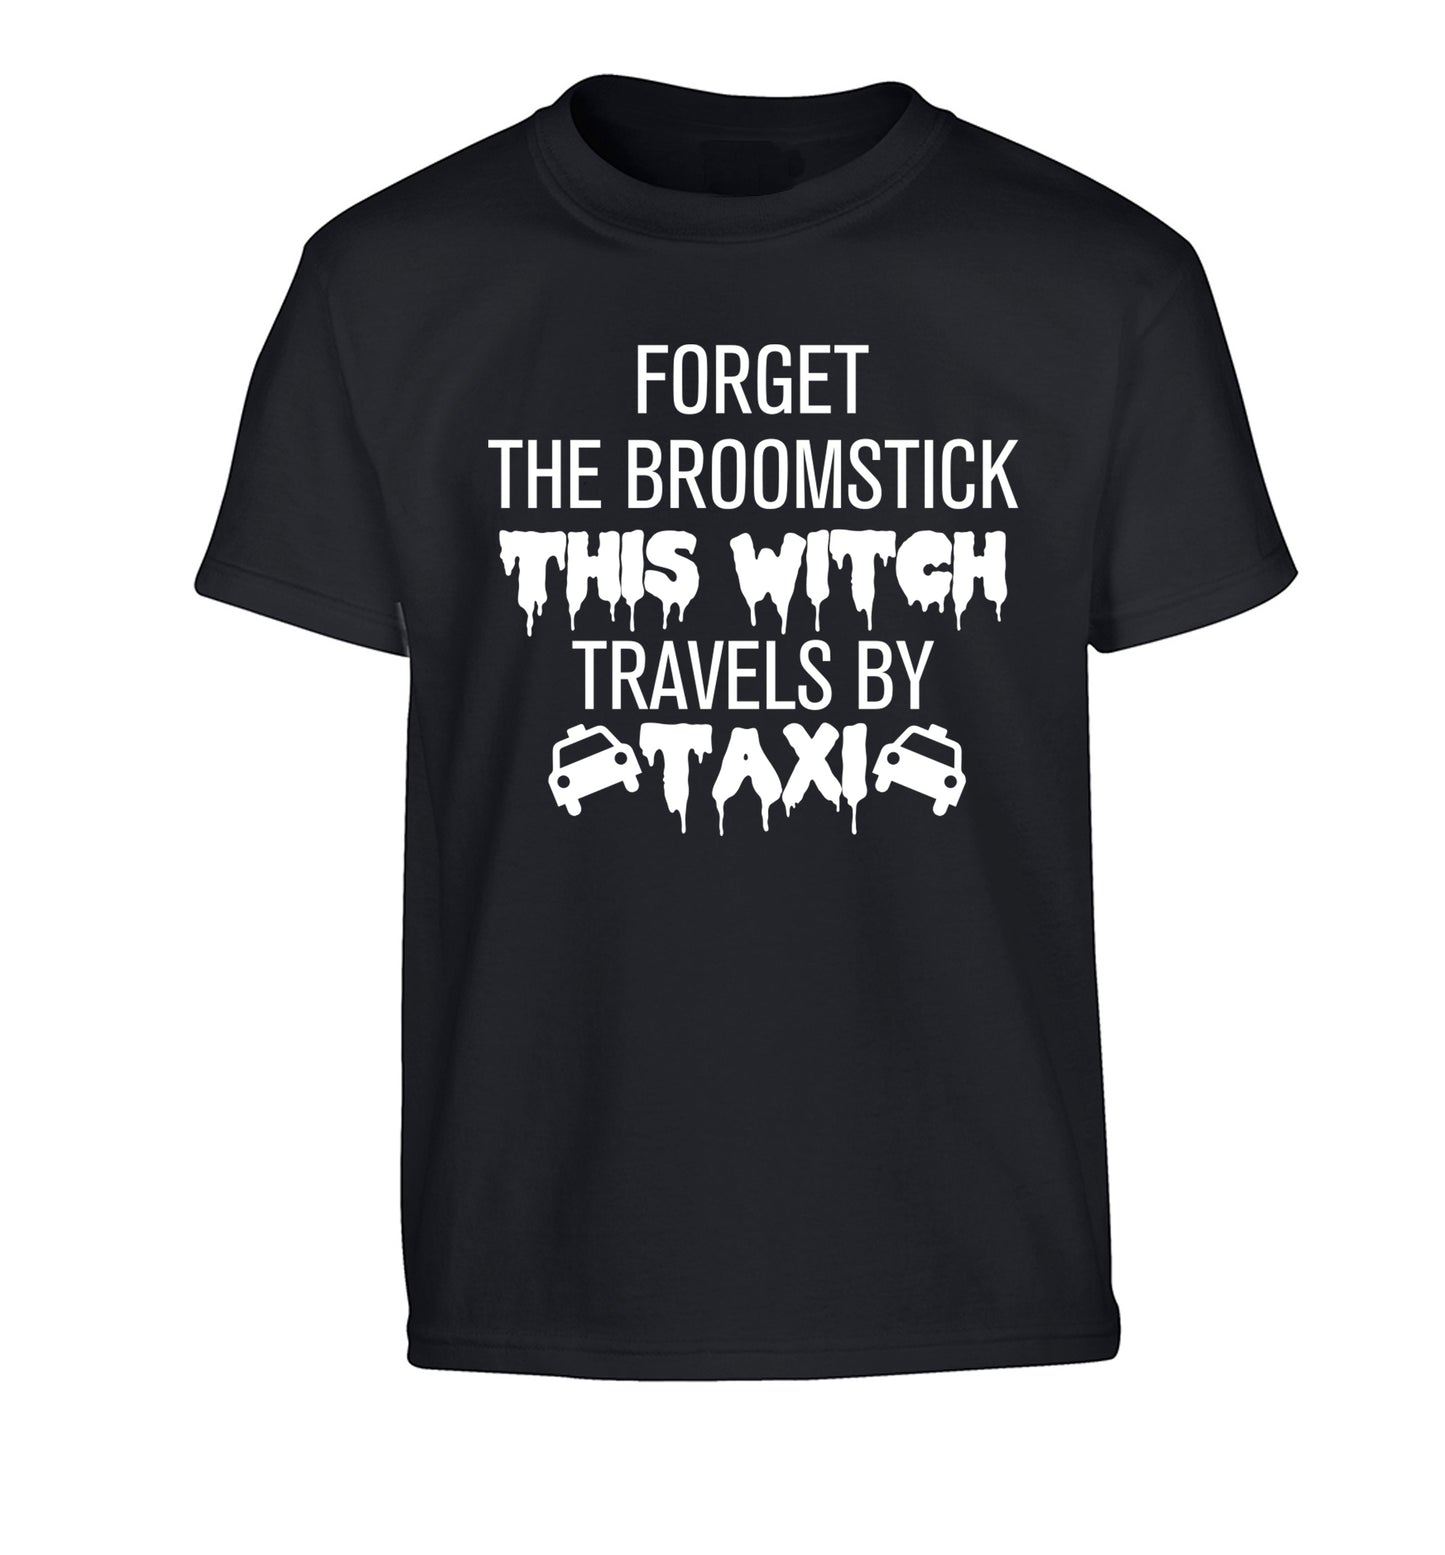 Forget the broomstick this witch travels by taxi Children's black Tshirt 12-14 Years